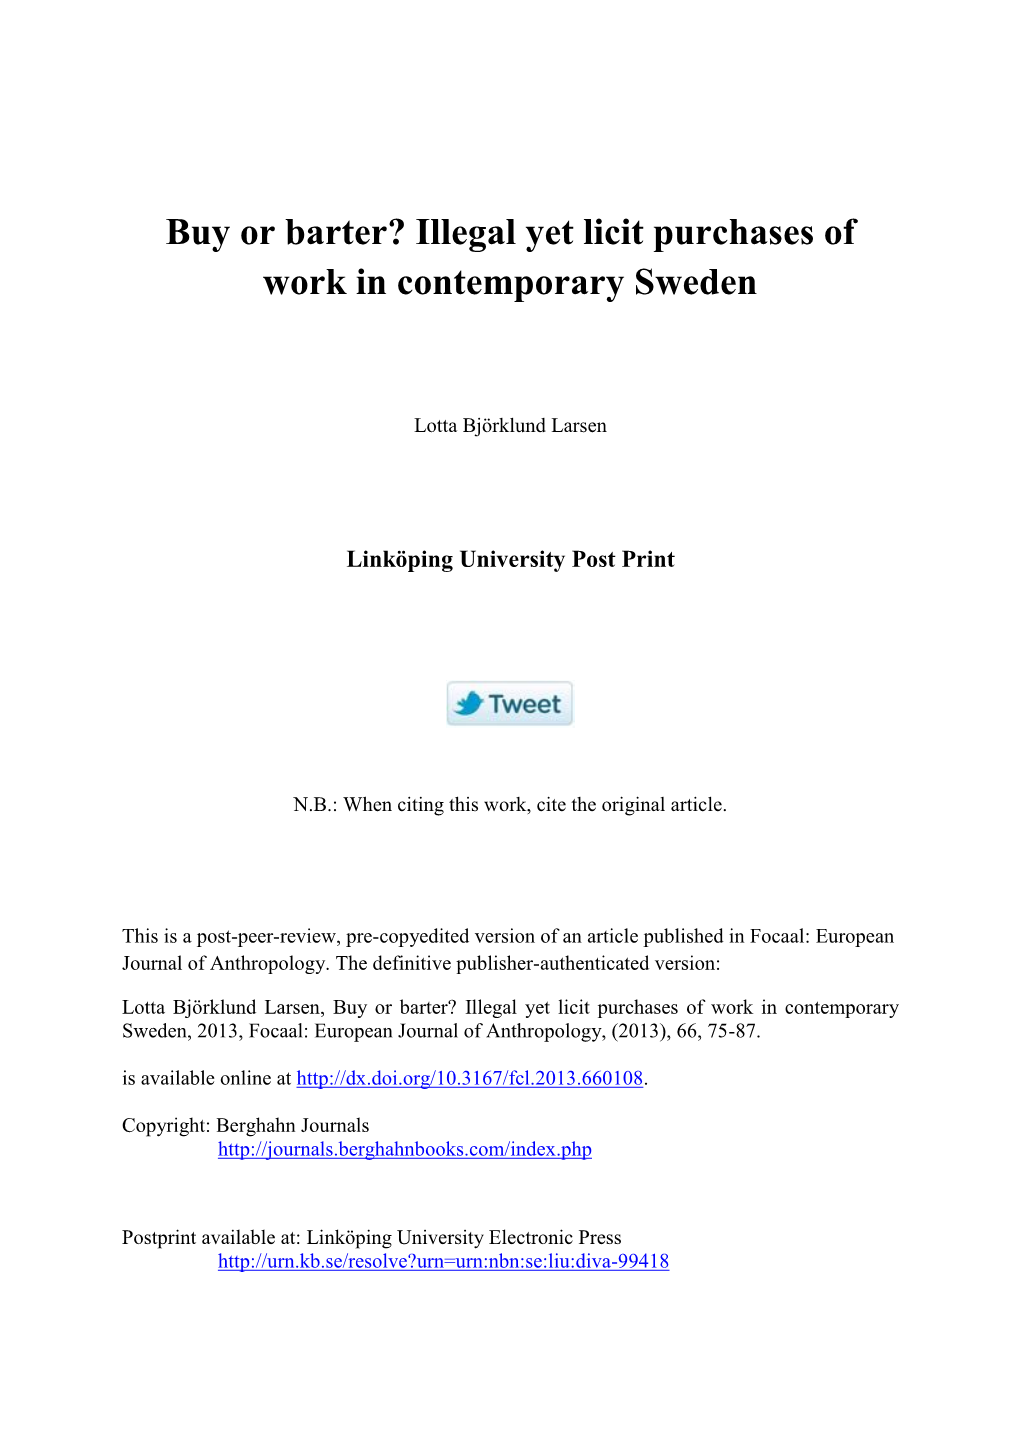 Buy Or Barter? Illegal Yet Licit Purchases of Work in Contemporary Sweden